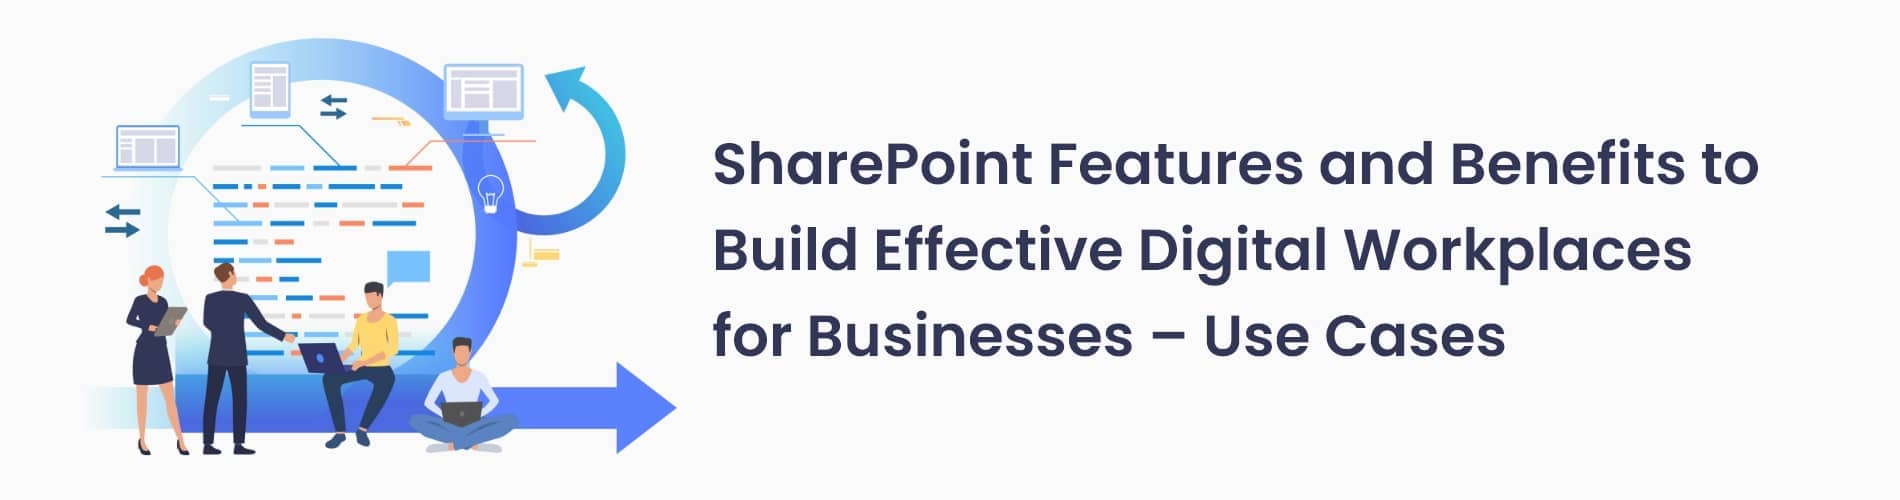 SharePoint Features and Benefits to Build Effective Digital Workplace 